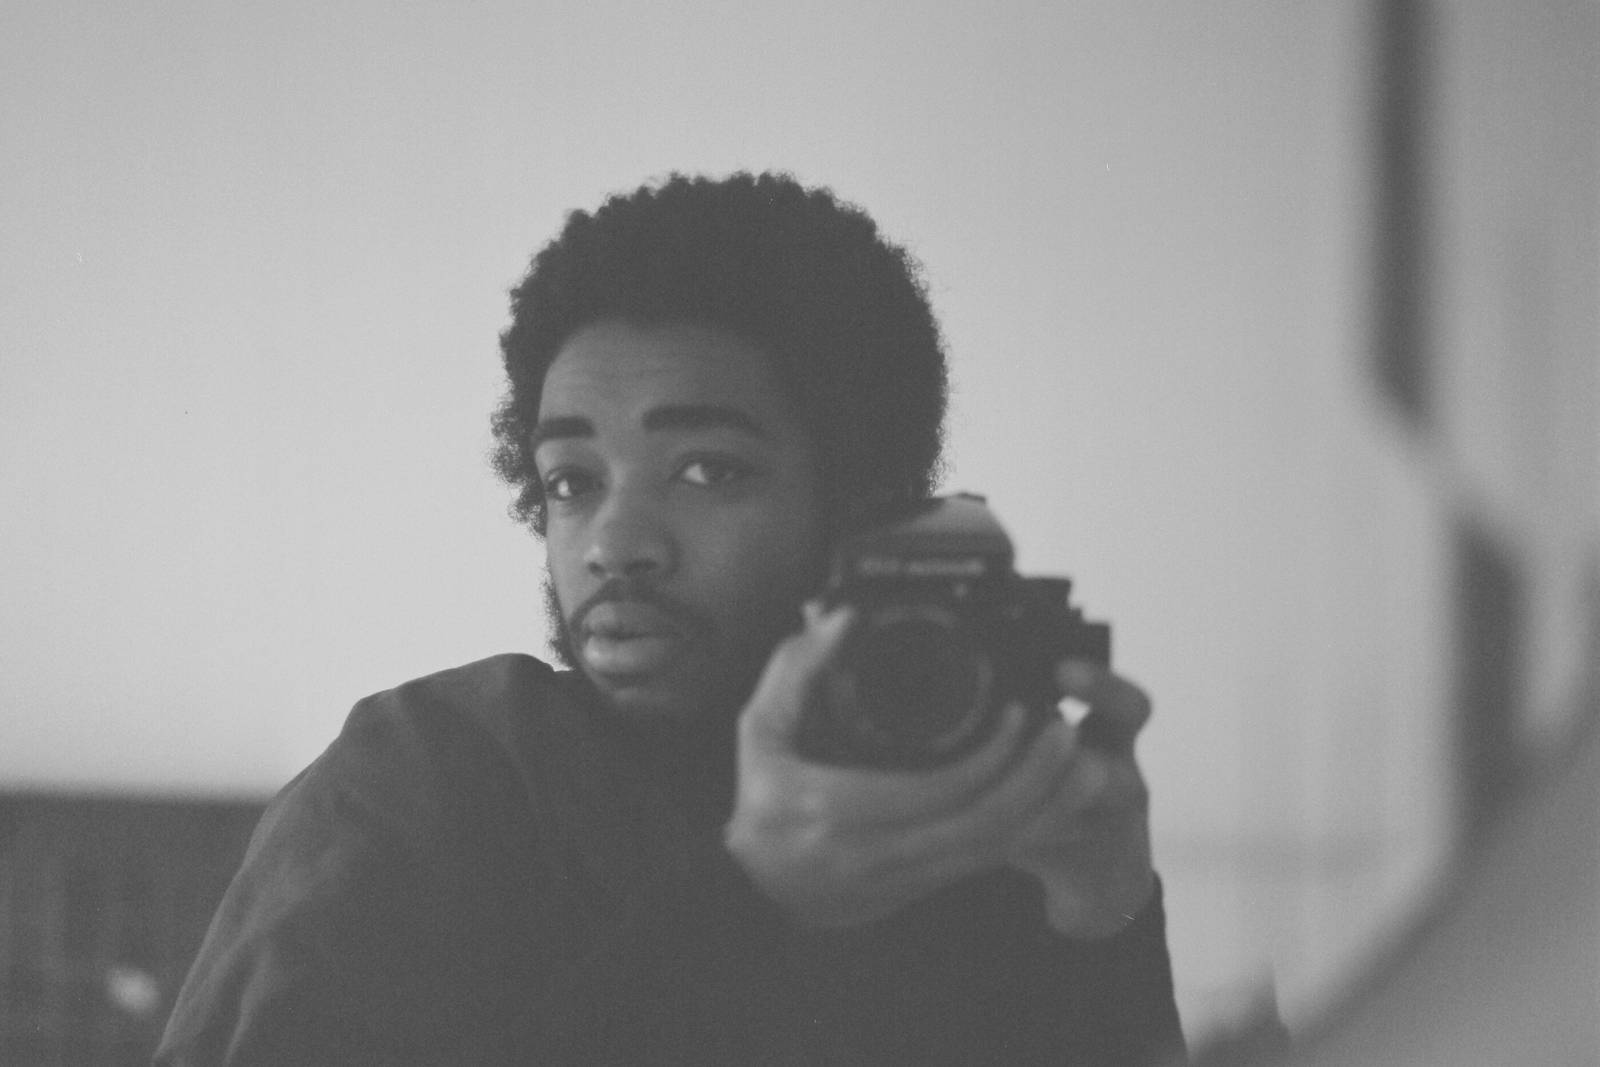 A black-and-white selfie style photo of artist Abel (they/them), holding the camera gently next to their face and looking into the mirror